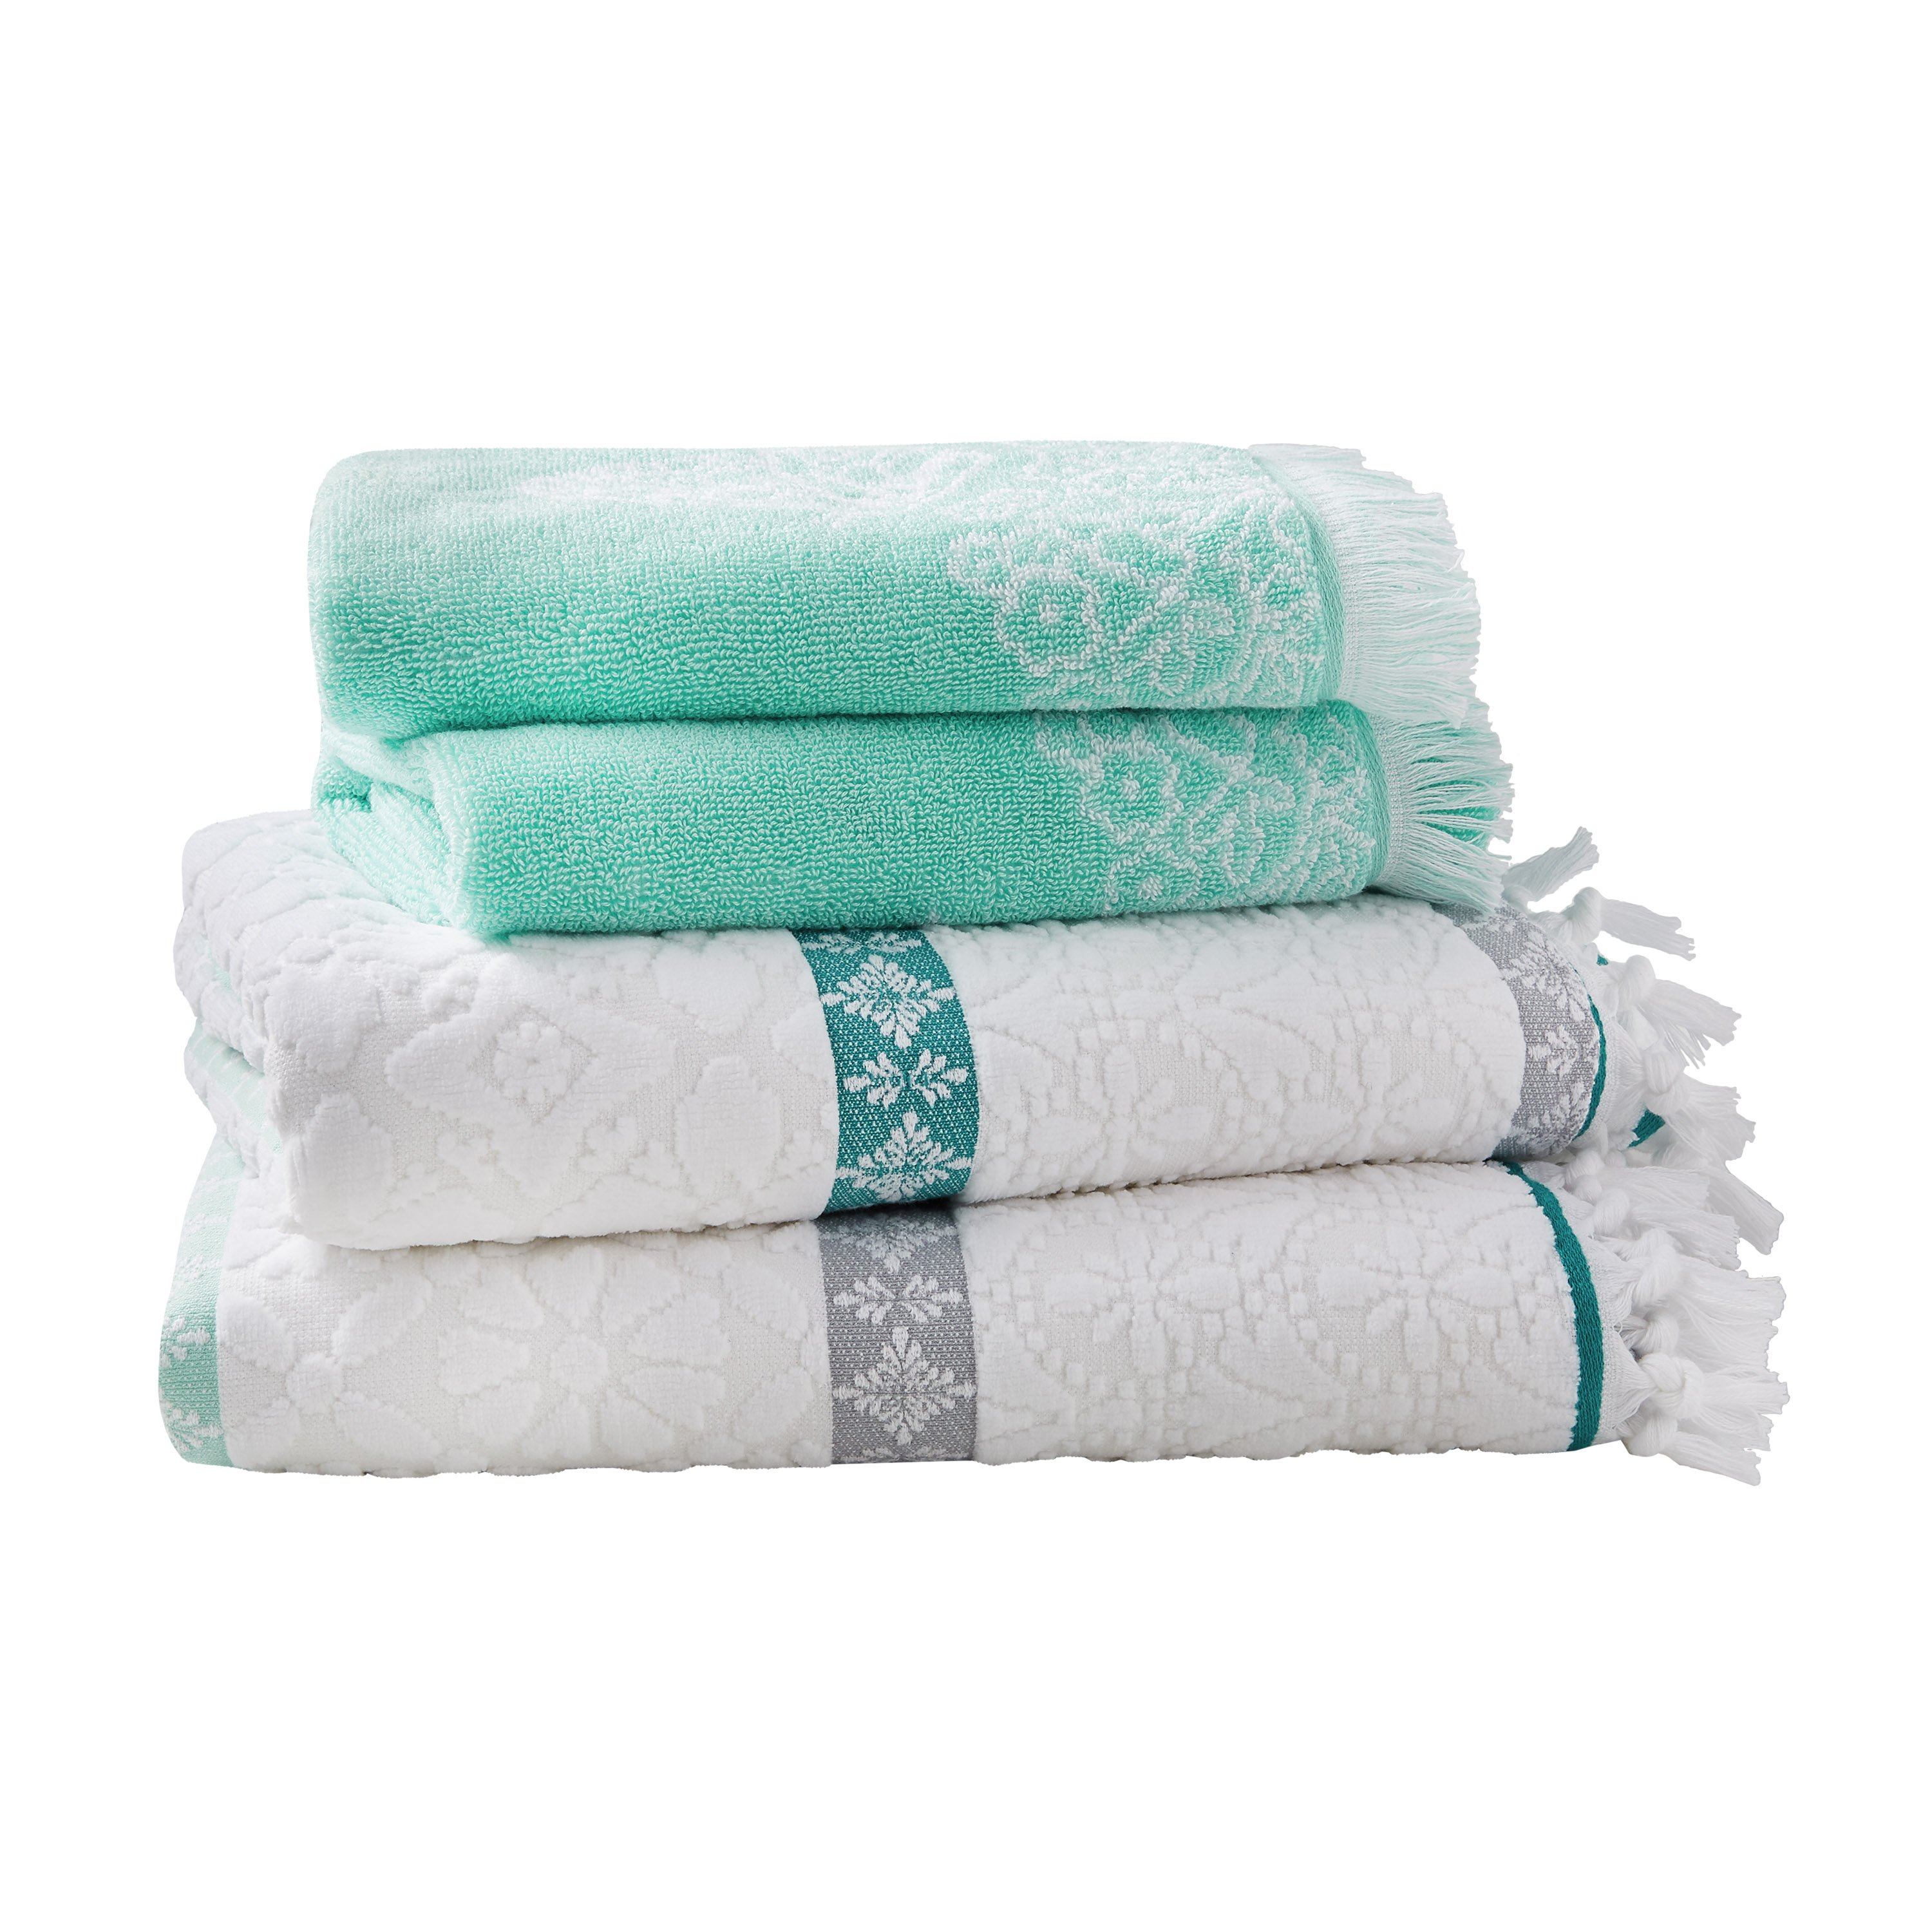 The Pioneer Woman 4 Piece Cotton Bath Towel Set, Soft Silver - image 1 of 5